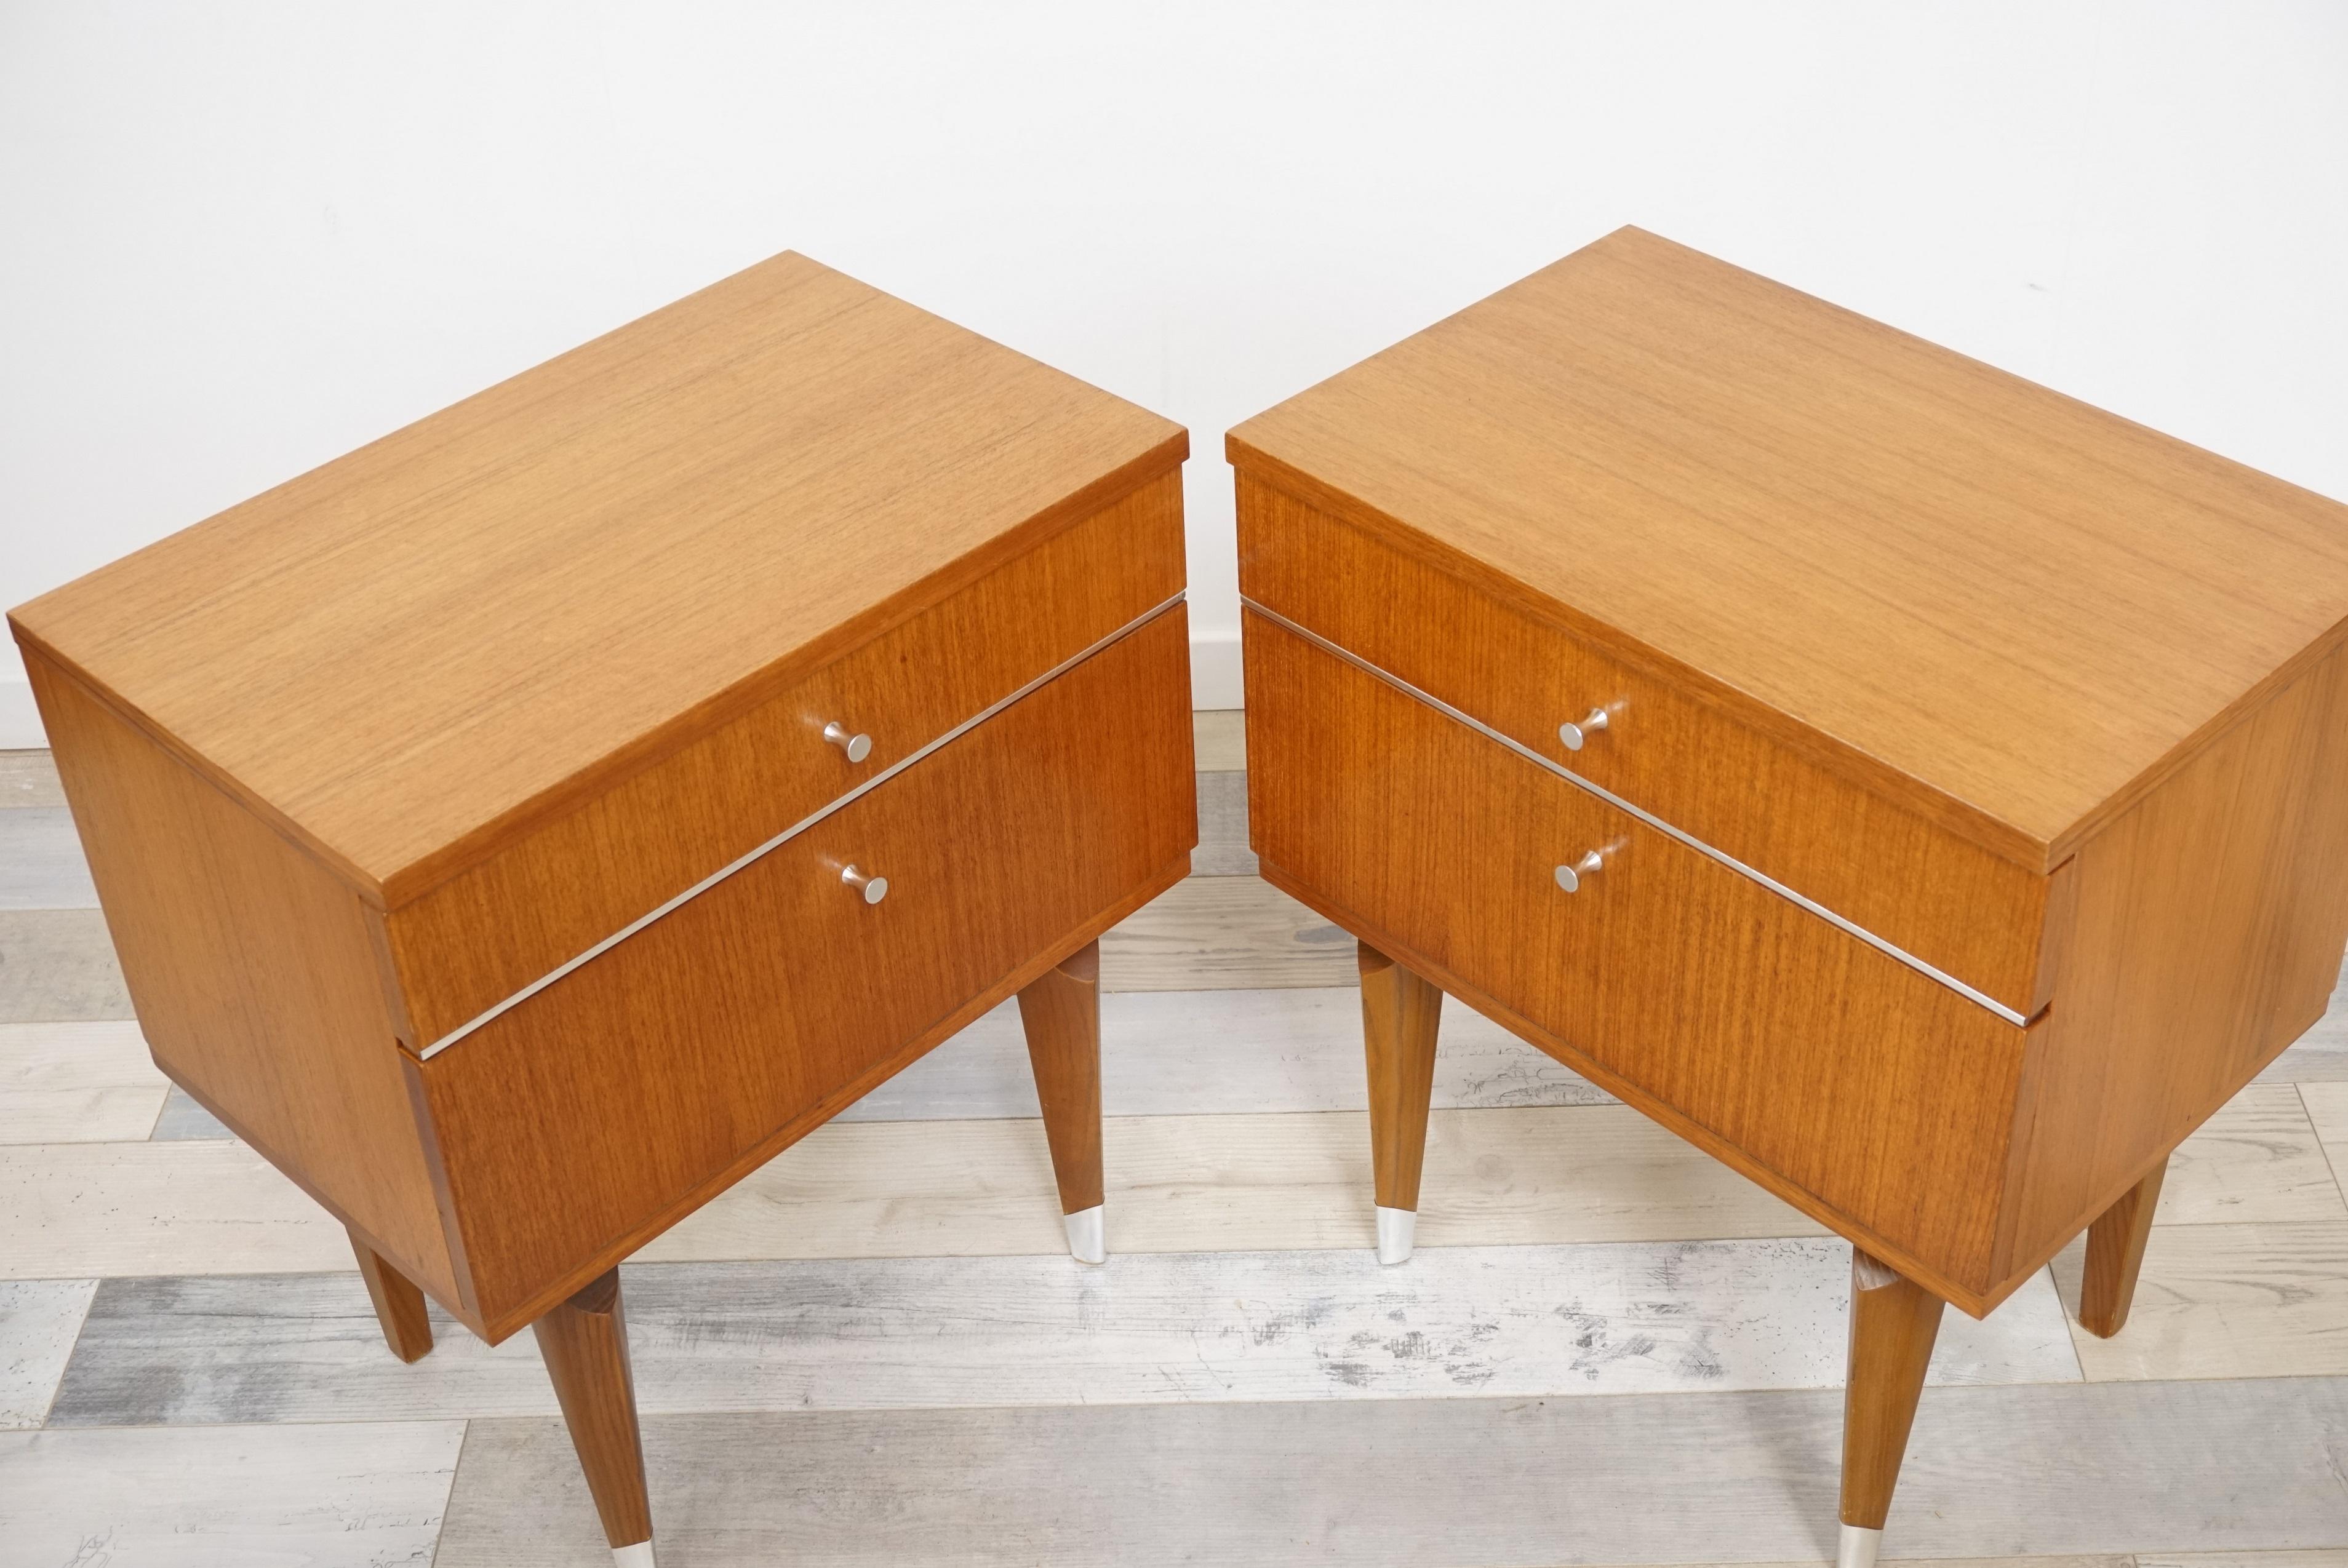 Pair of 1950s design bedside tables in teak, chromed handles and chromed edging, square feet chromed finished, one drawer with an opening in front by flap... All in excellent condition!